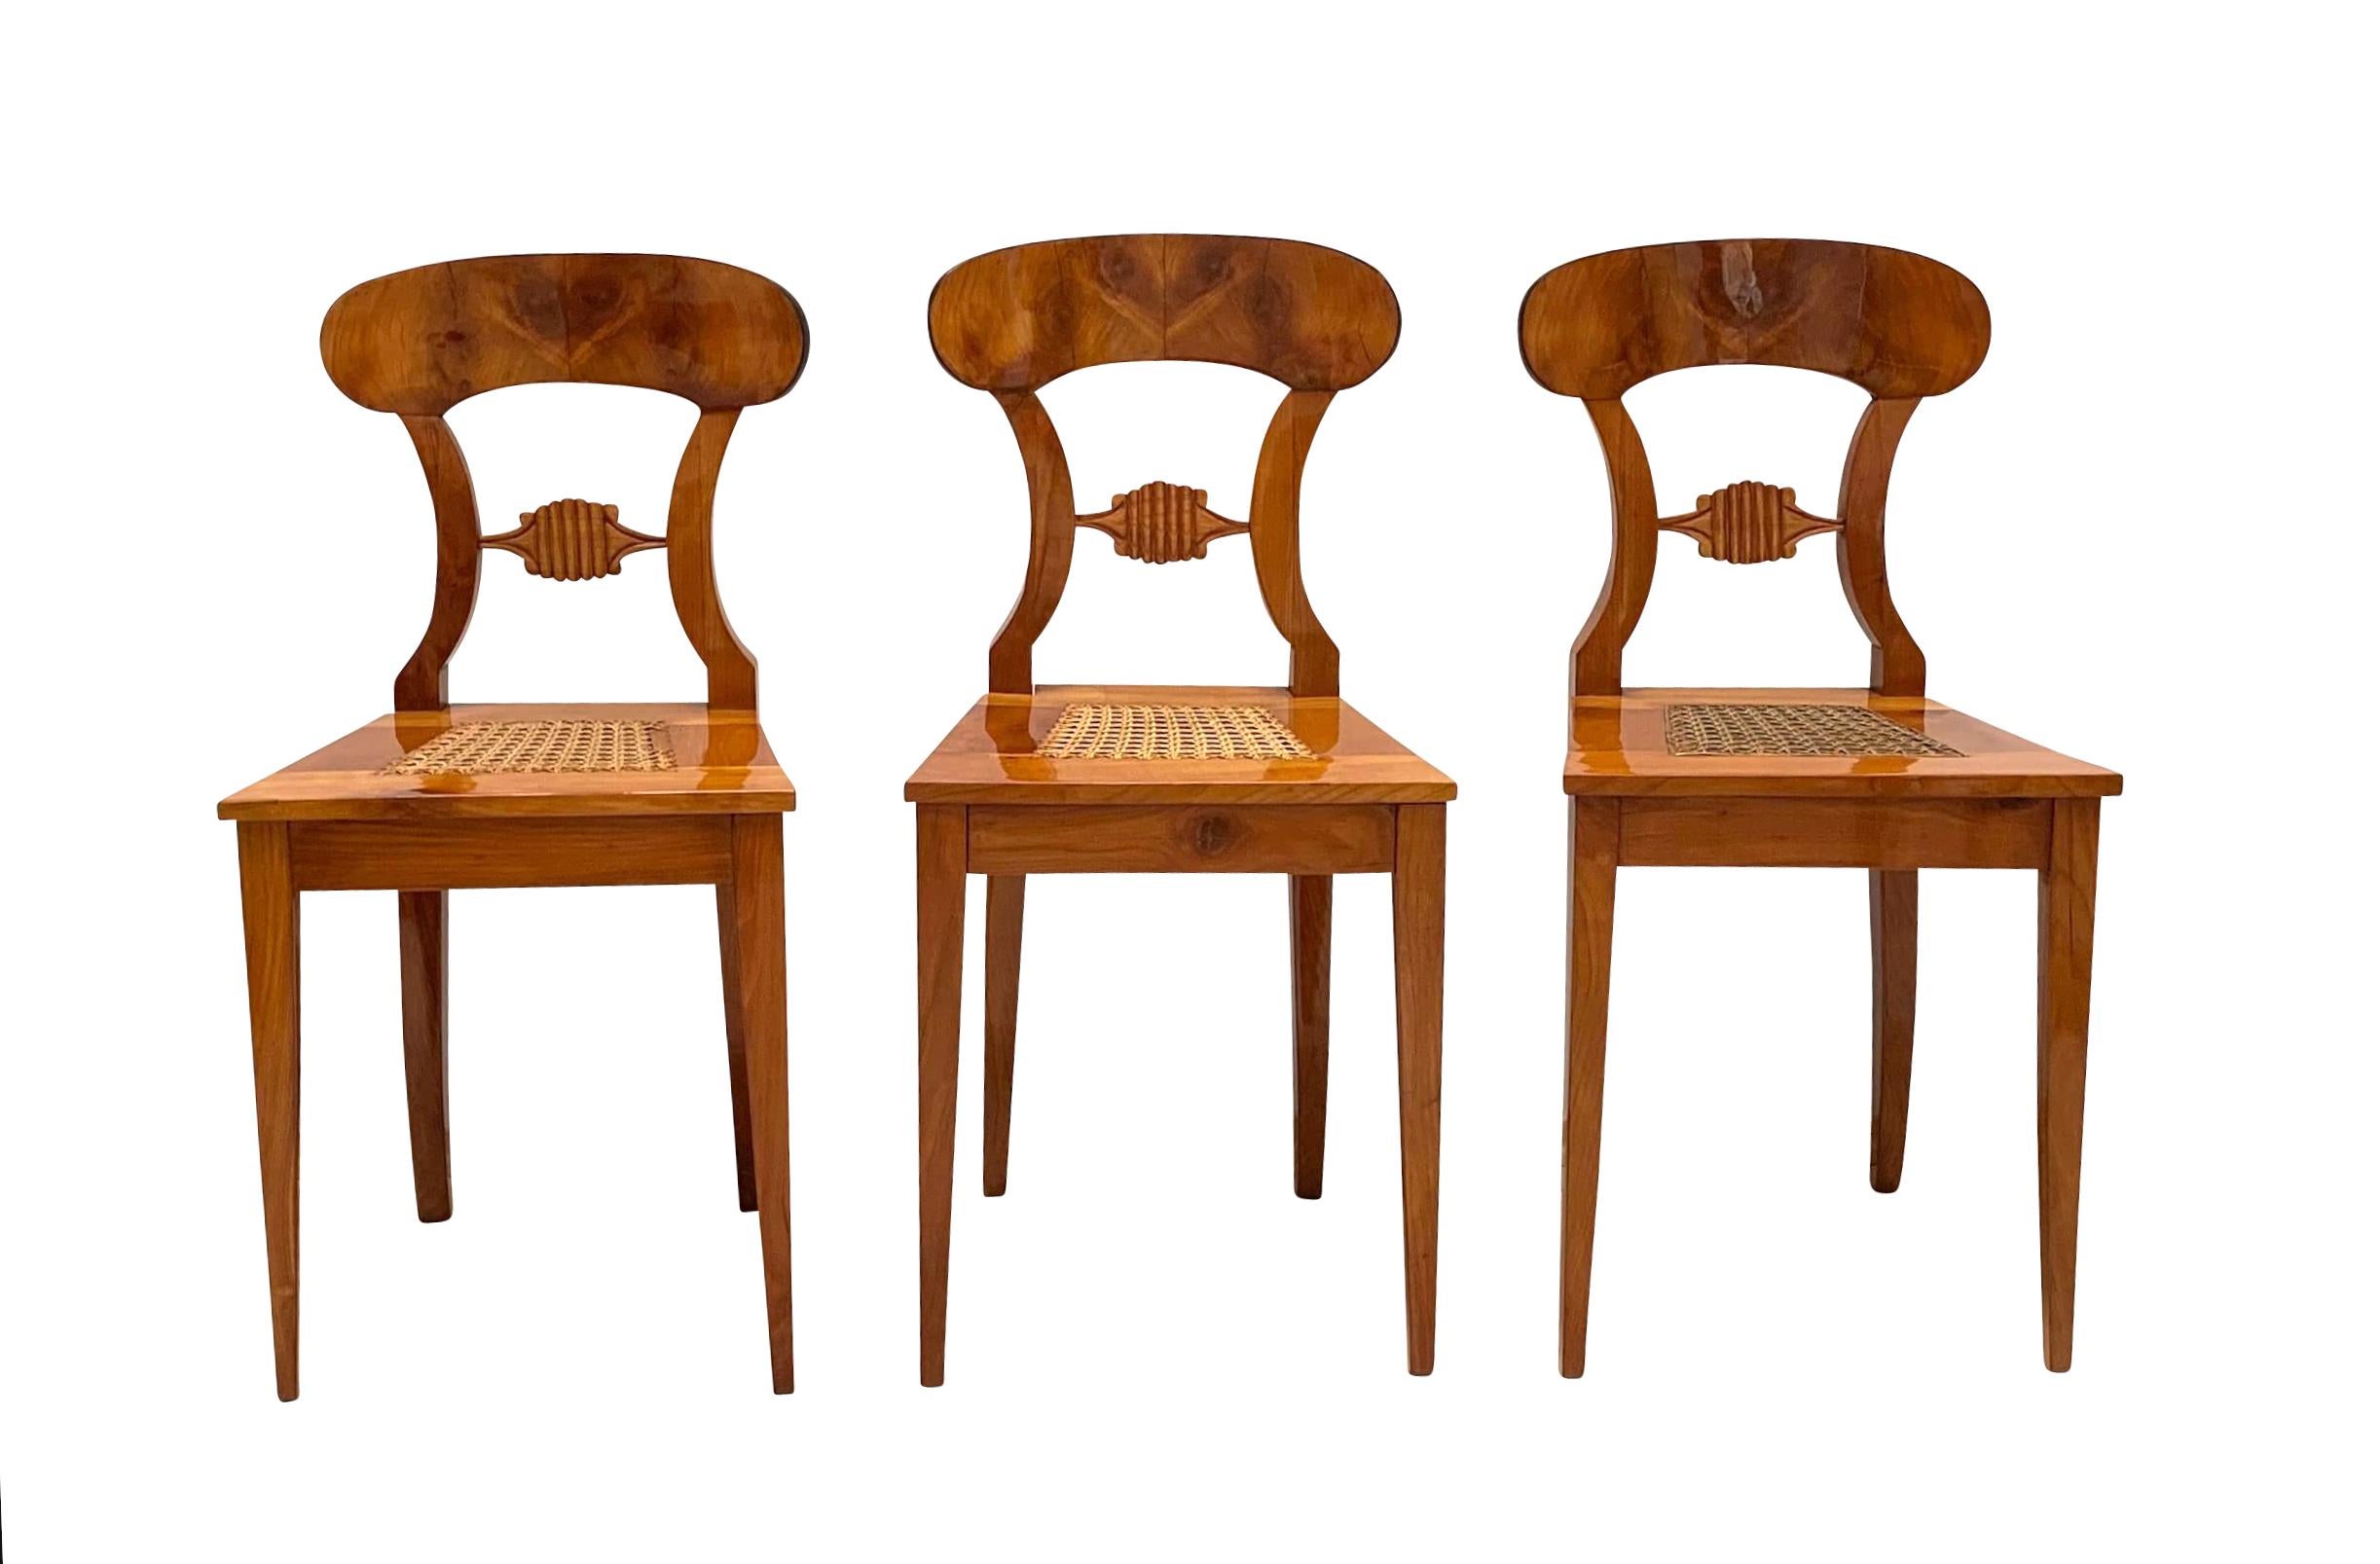 Set of Six Biedermeier Board Chairs, Cherry Wood and Mesh, Vienna, circa 1830 In Good Condition For Sale In Regensburg, DE